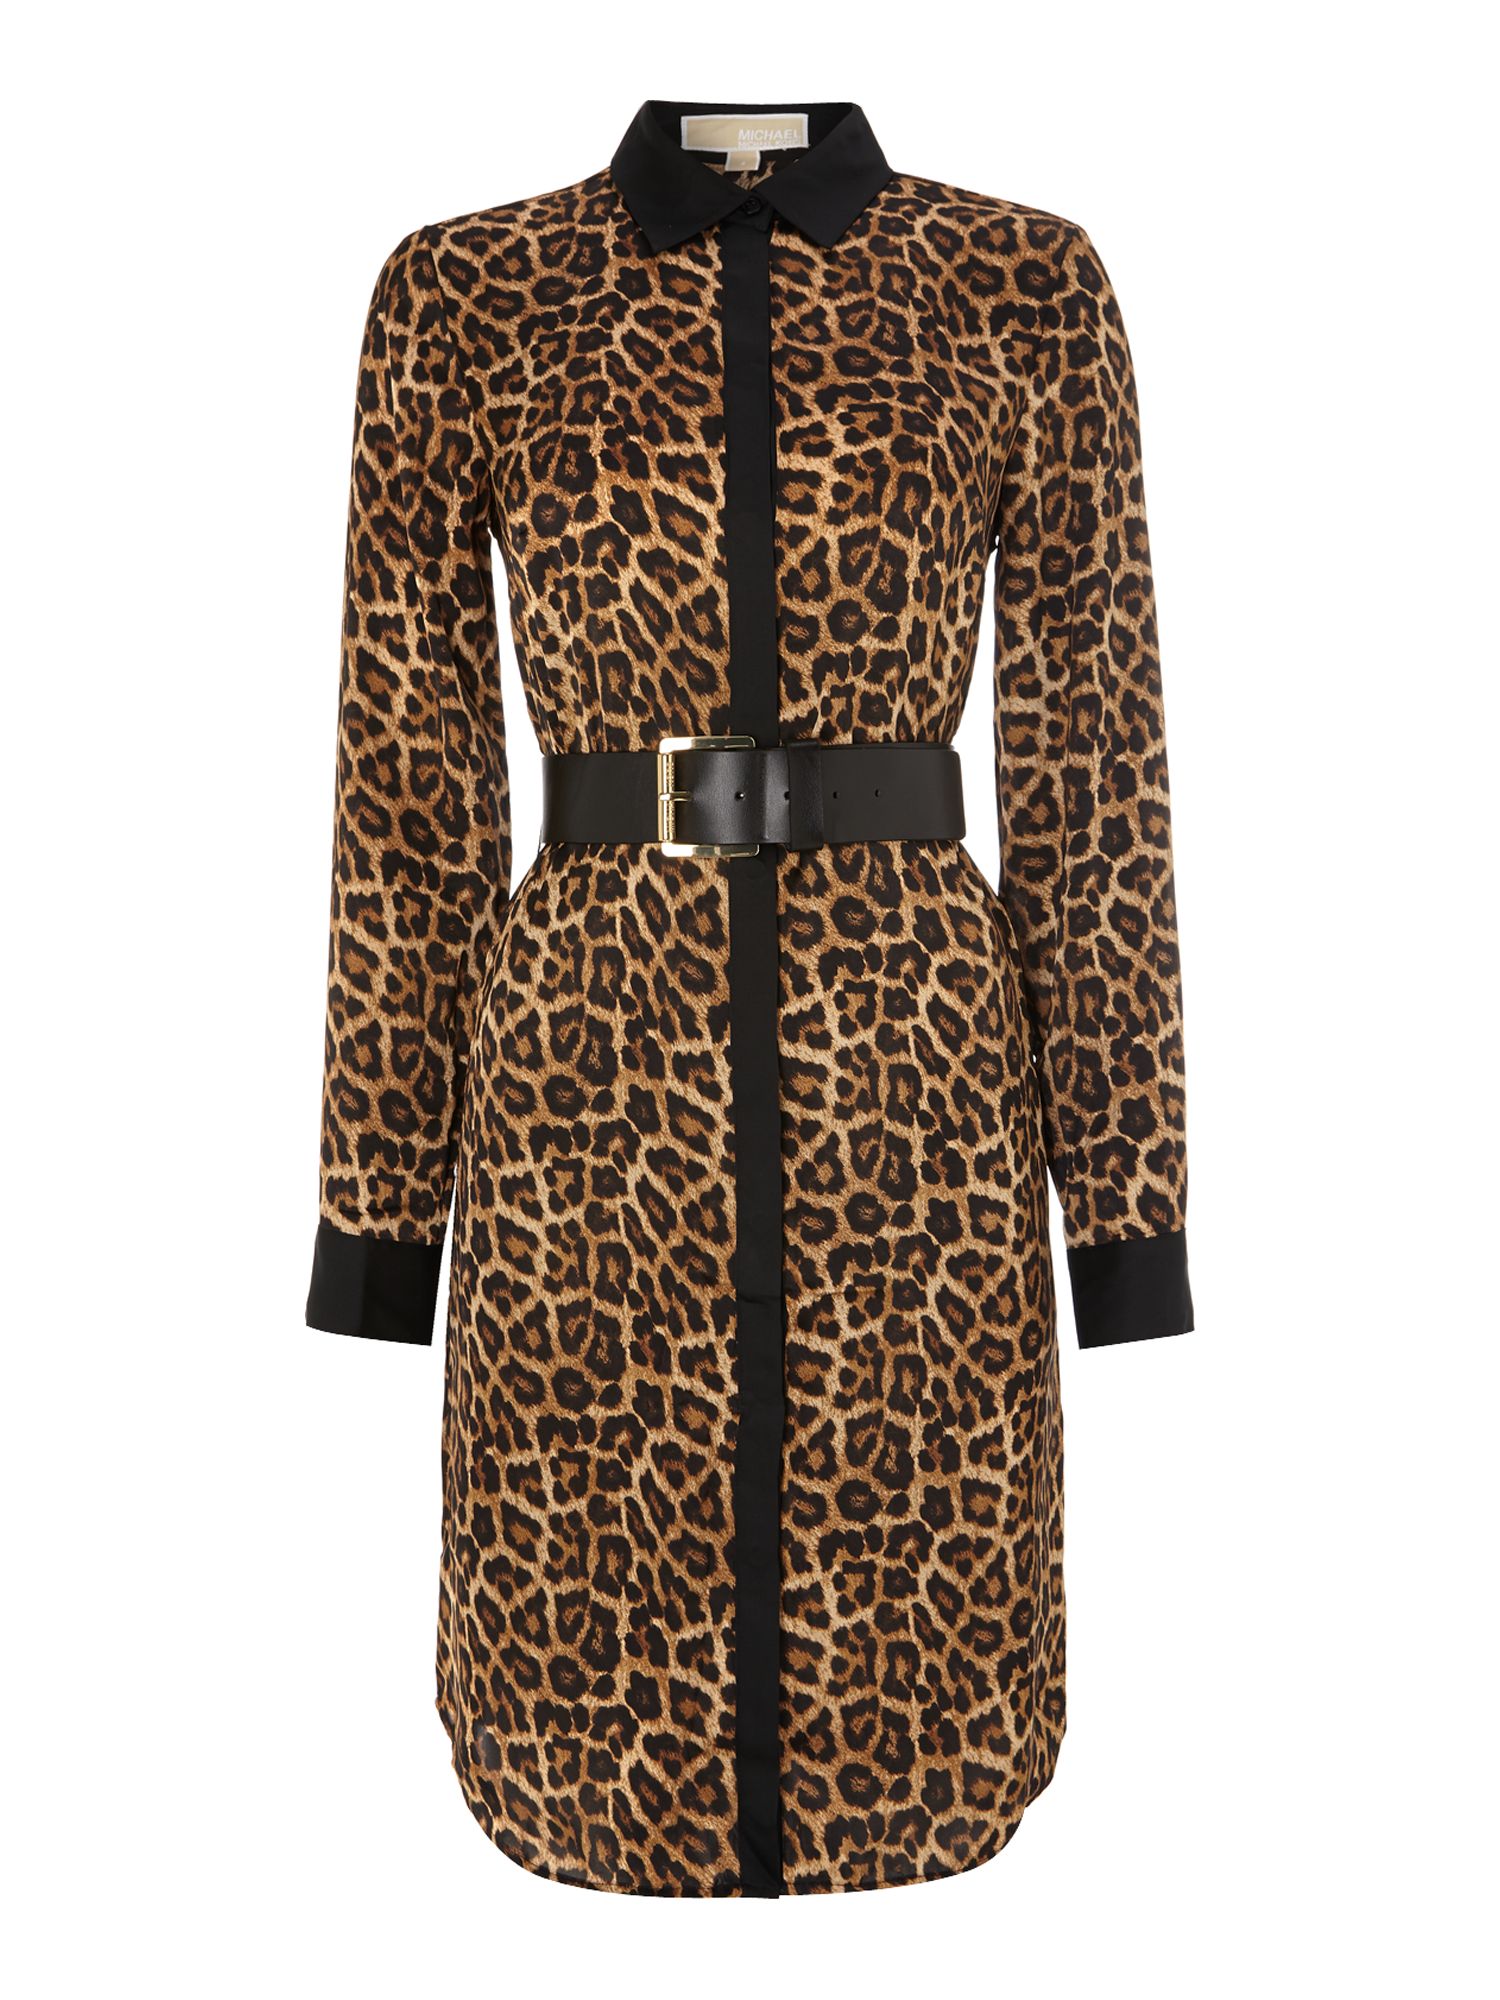 Michael Kors Leopard Print Shirt Dress with Belt in Animal (Toffee) | Lyst